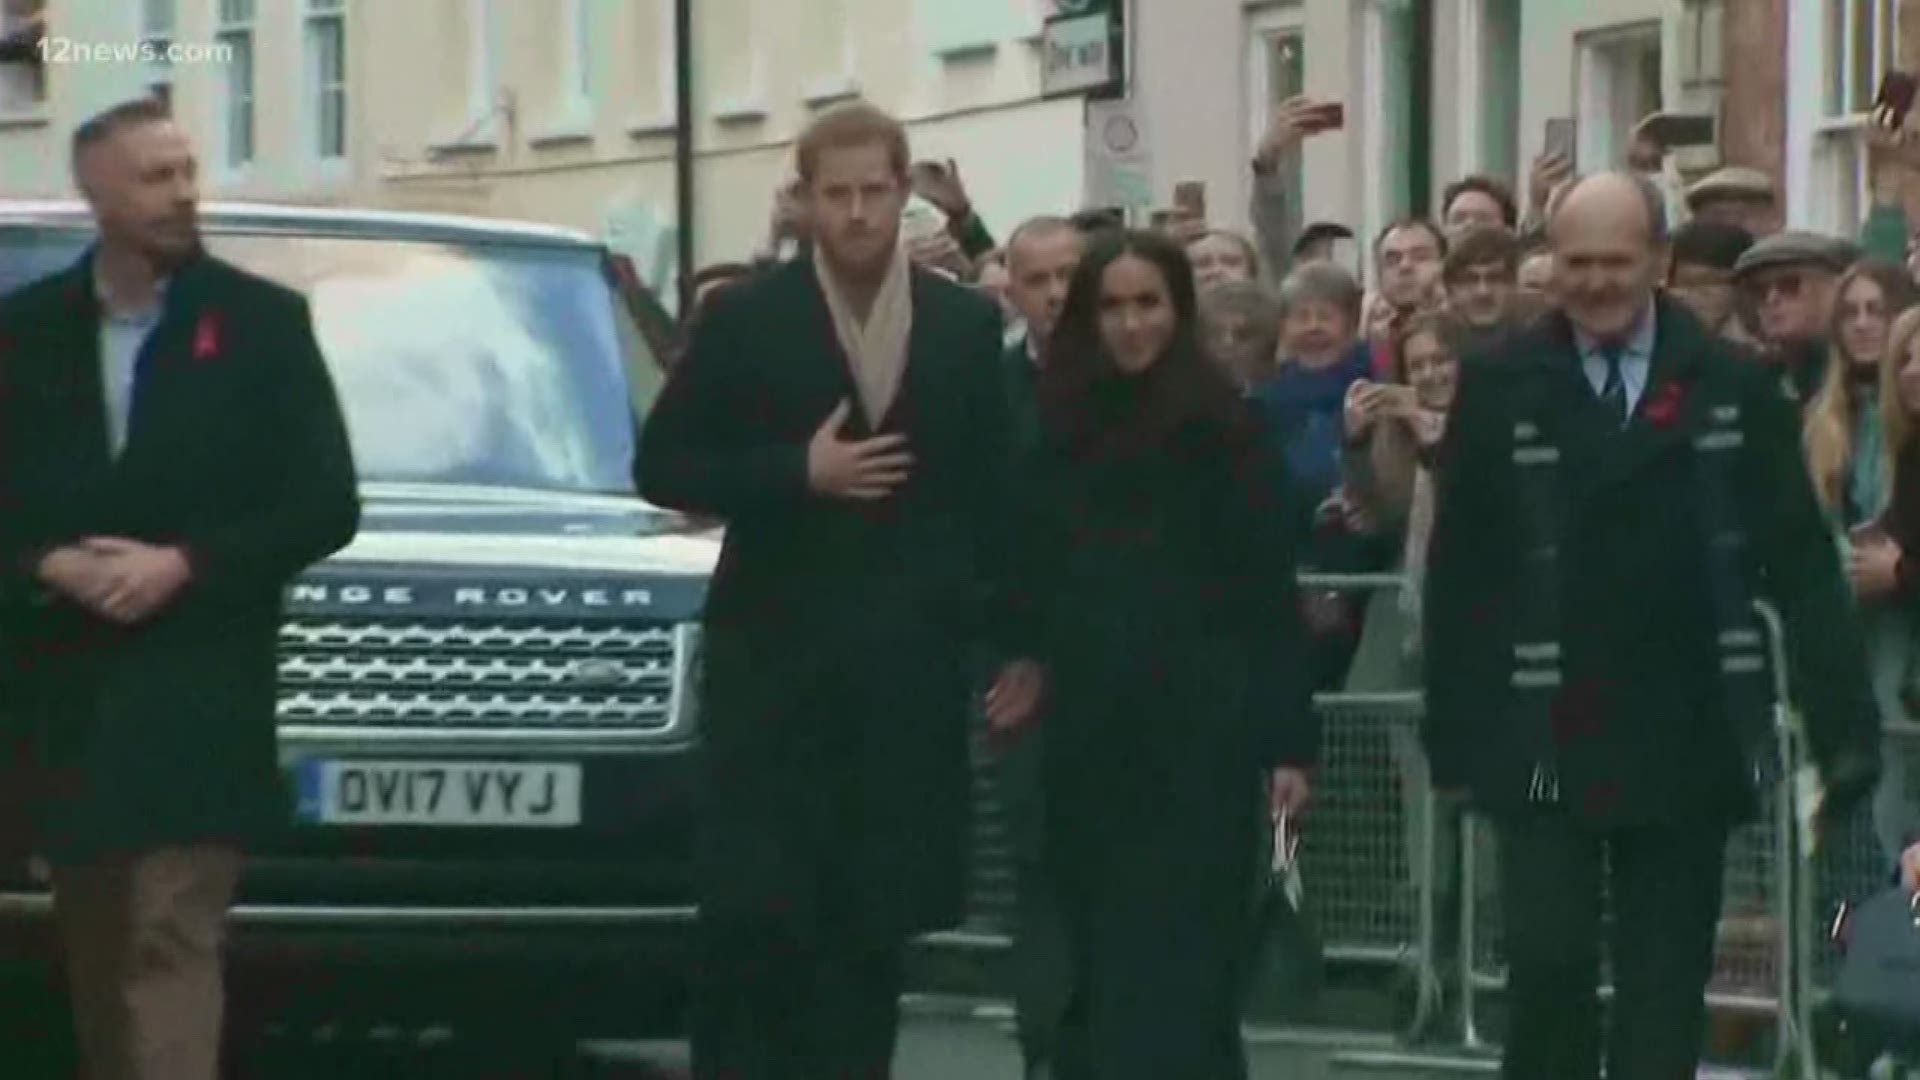 Beyonce is getting into the Christmas spirit and Meghan Markle carried out their first official engagement today in Nottingham.